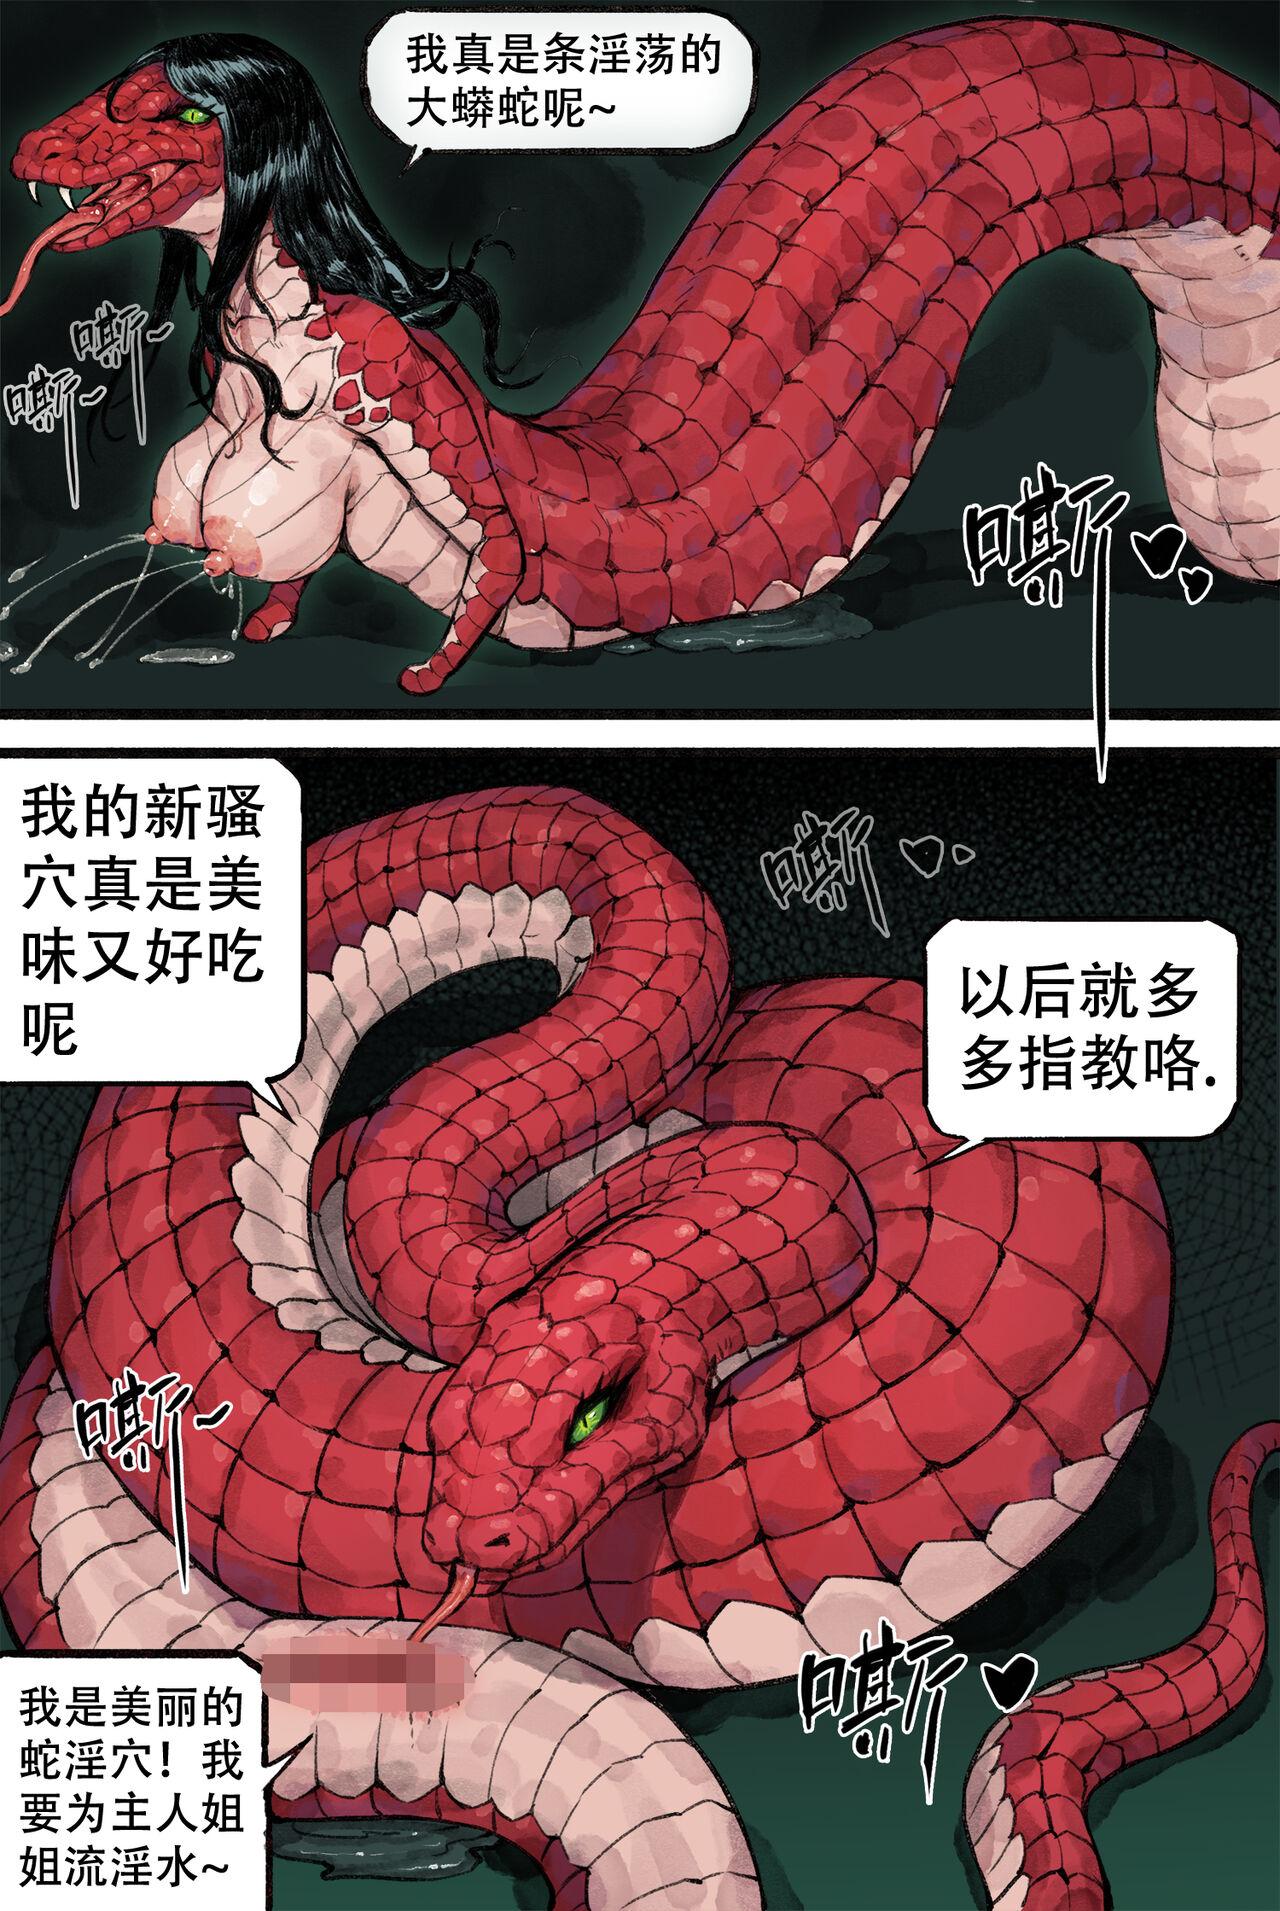 Muscular 与蛇妖融合 - Original Real Orgasms - Page 6